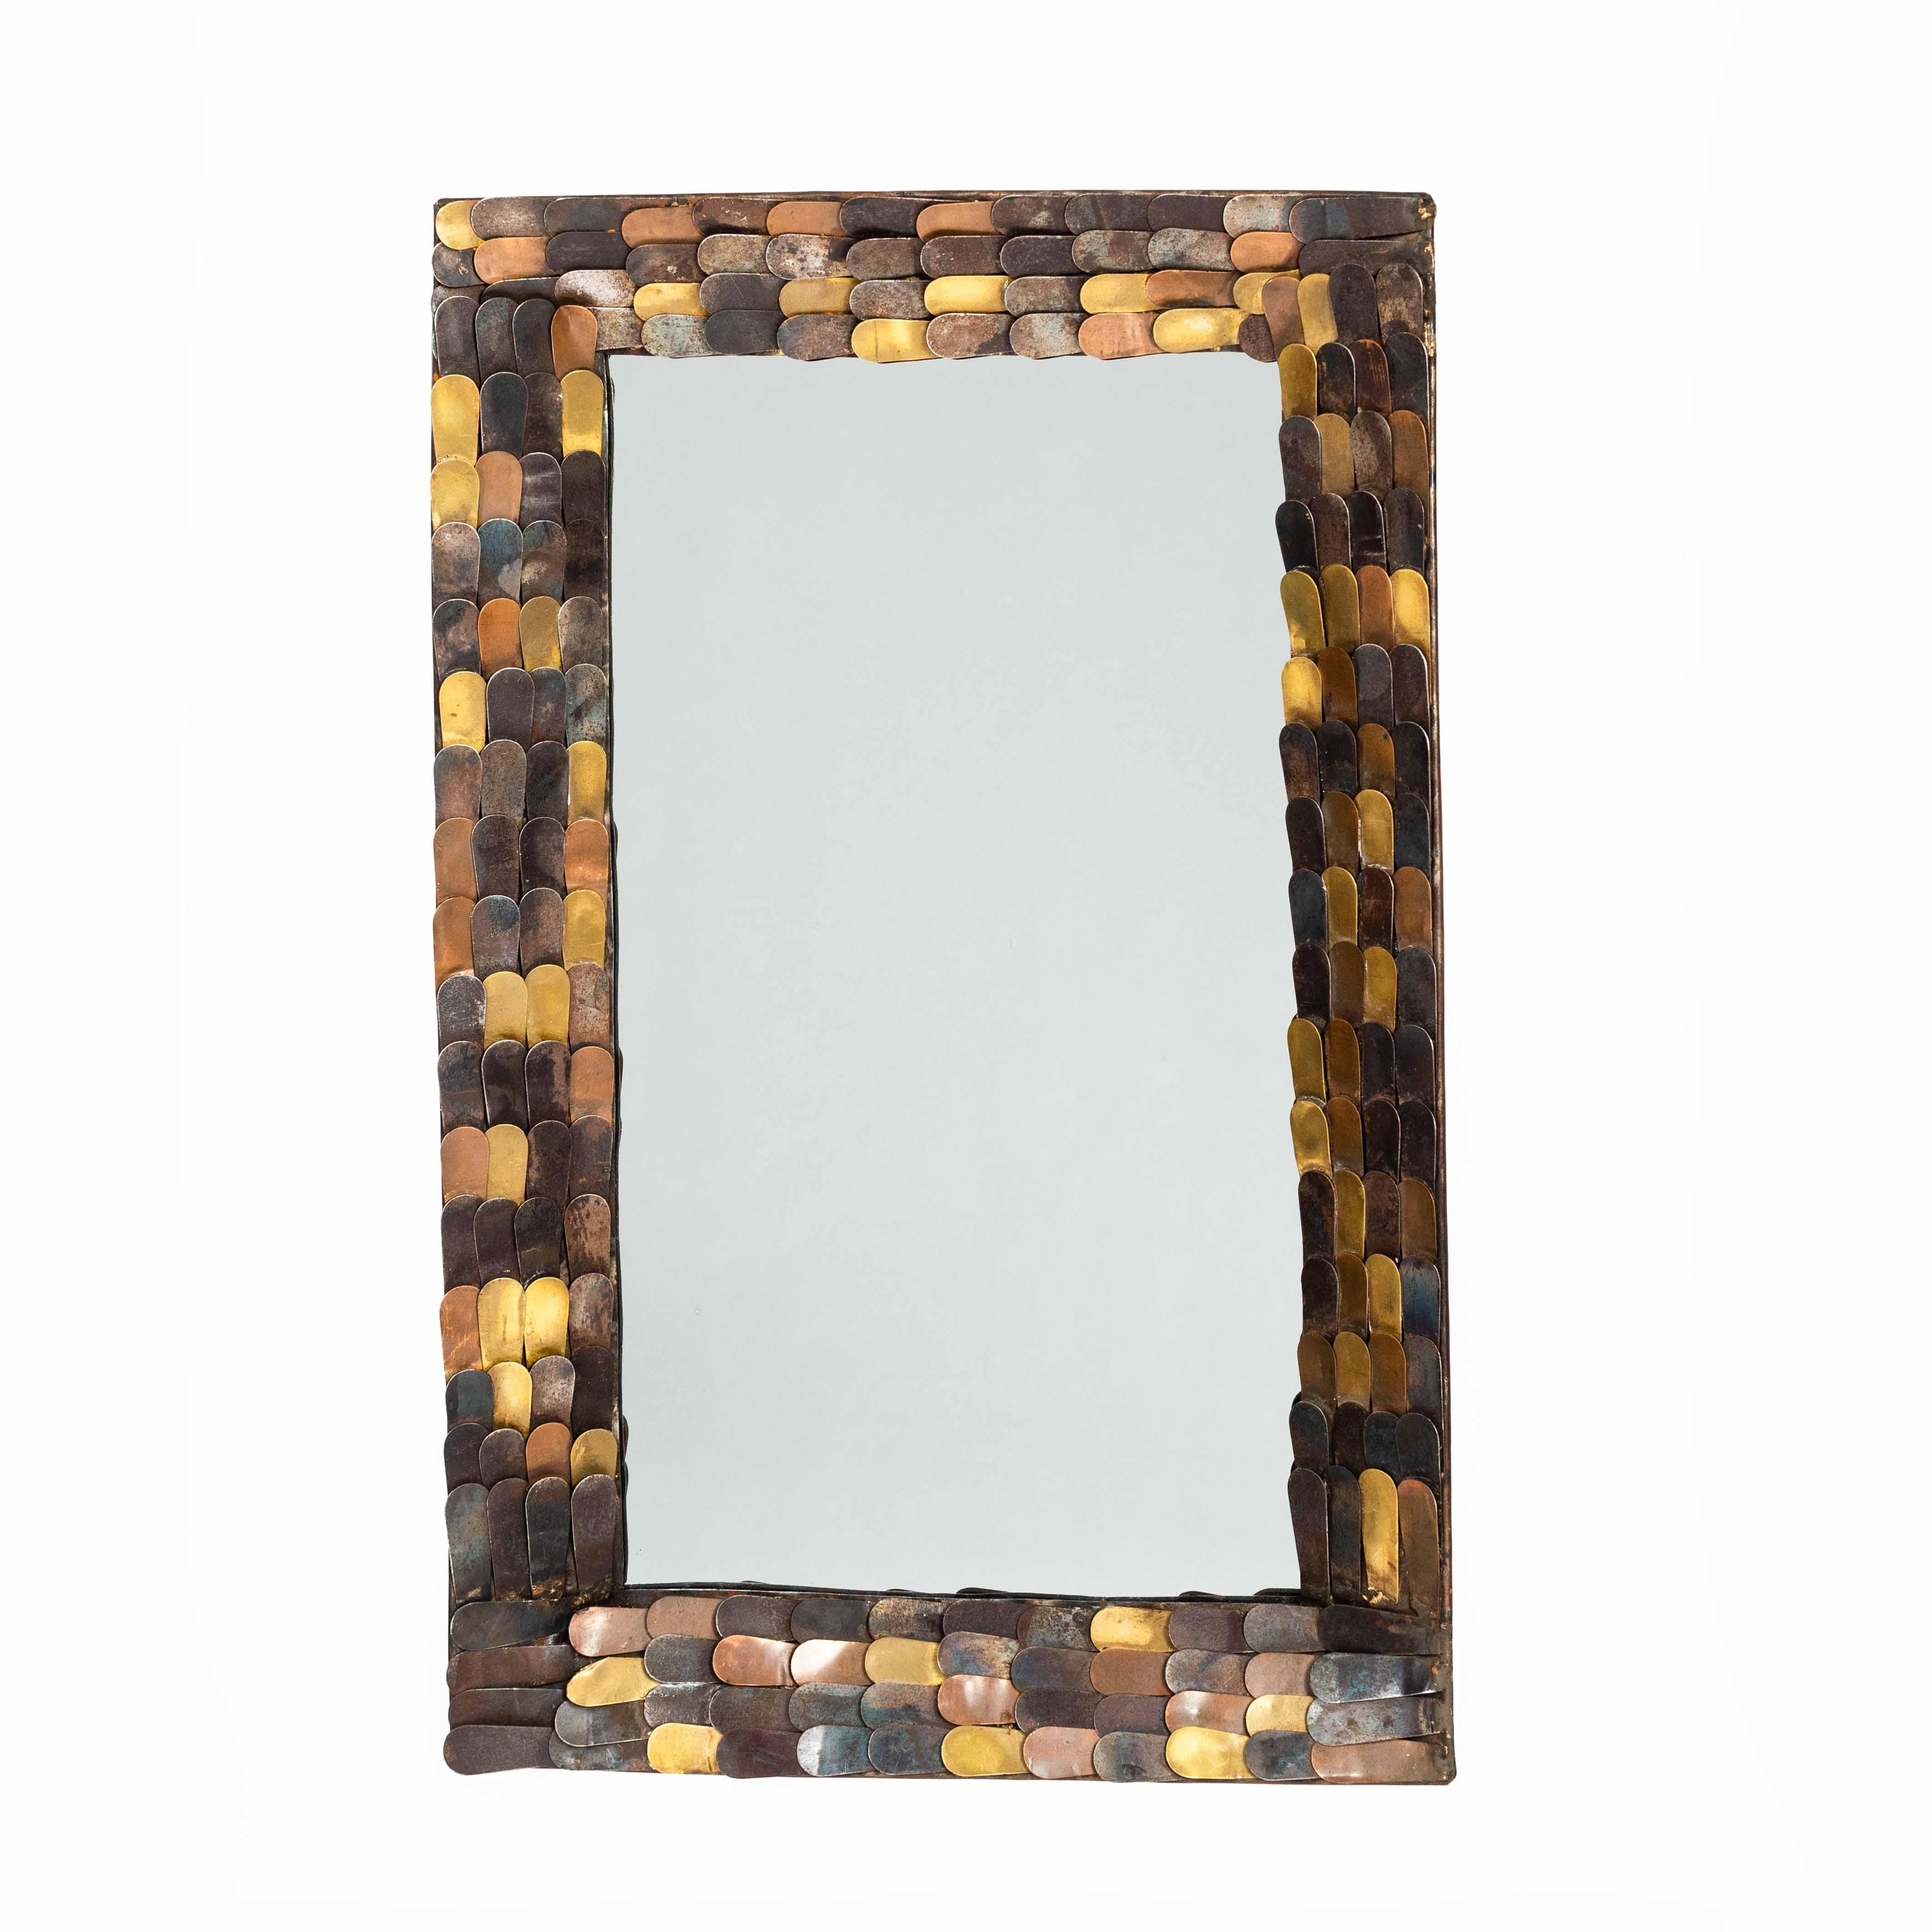 Exceptional mid-century mirror with metal scales of copper, brass and iron, Fance 1960-ies.

The frame has a width of 8.0cm and is beveled inward.  The tapered scales of the different metals are arranged in one direction and do not follow any